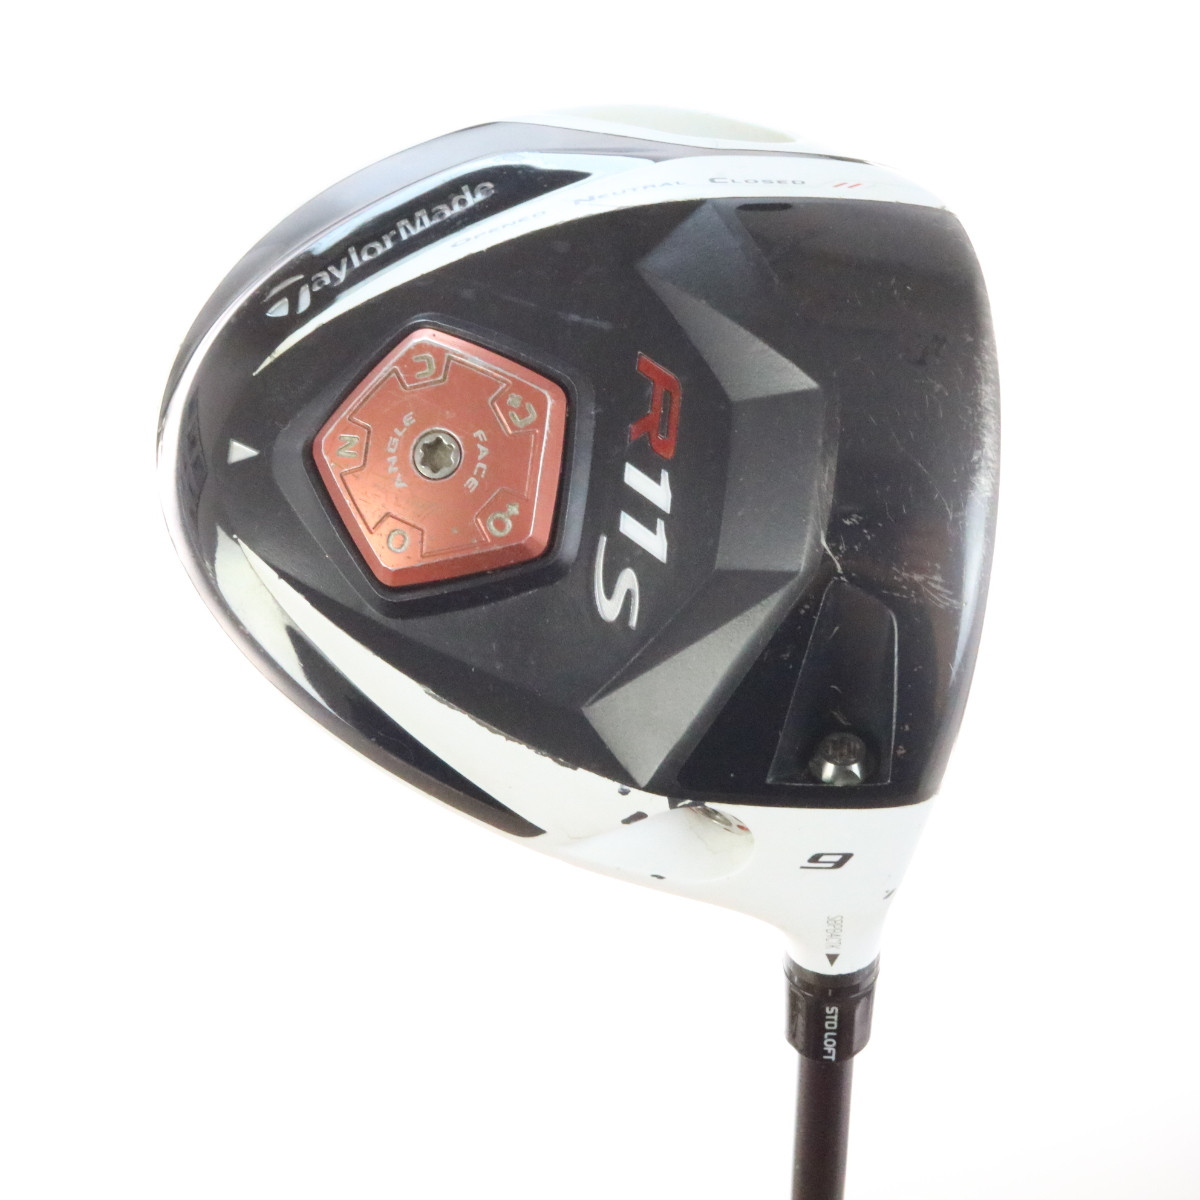 taylormade r11s driver fct settings chart